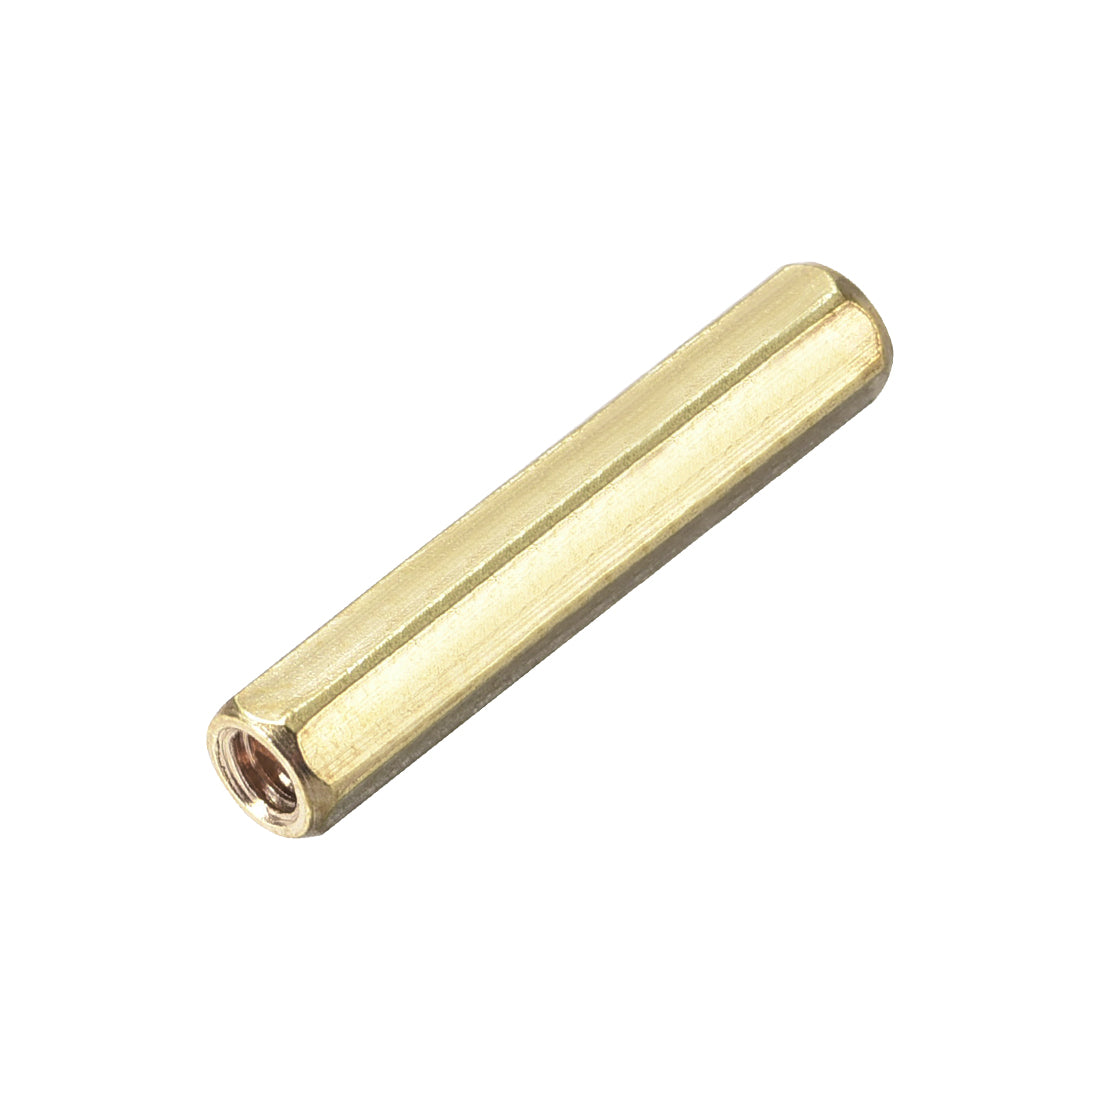 Uxcell Uxcell M5 x 20 mm Female to Female Hex Brass Spacer Standoff 30pcs